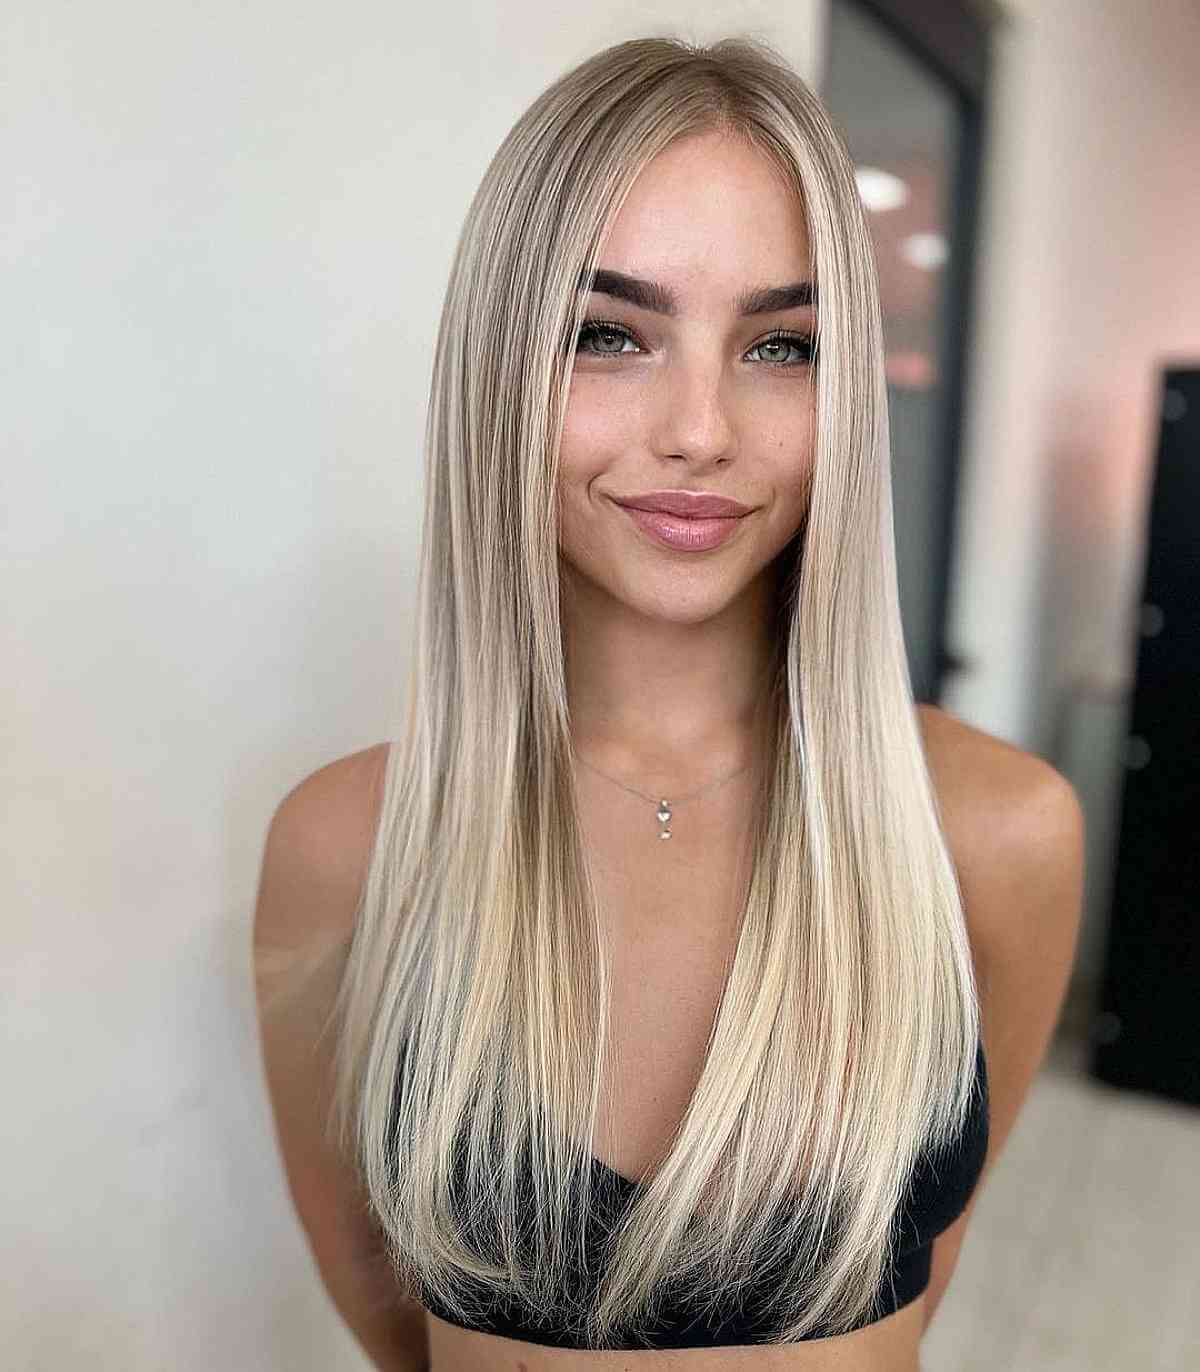 Sexy Long Straight Middle-Parted Blonde Hair